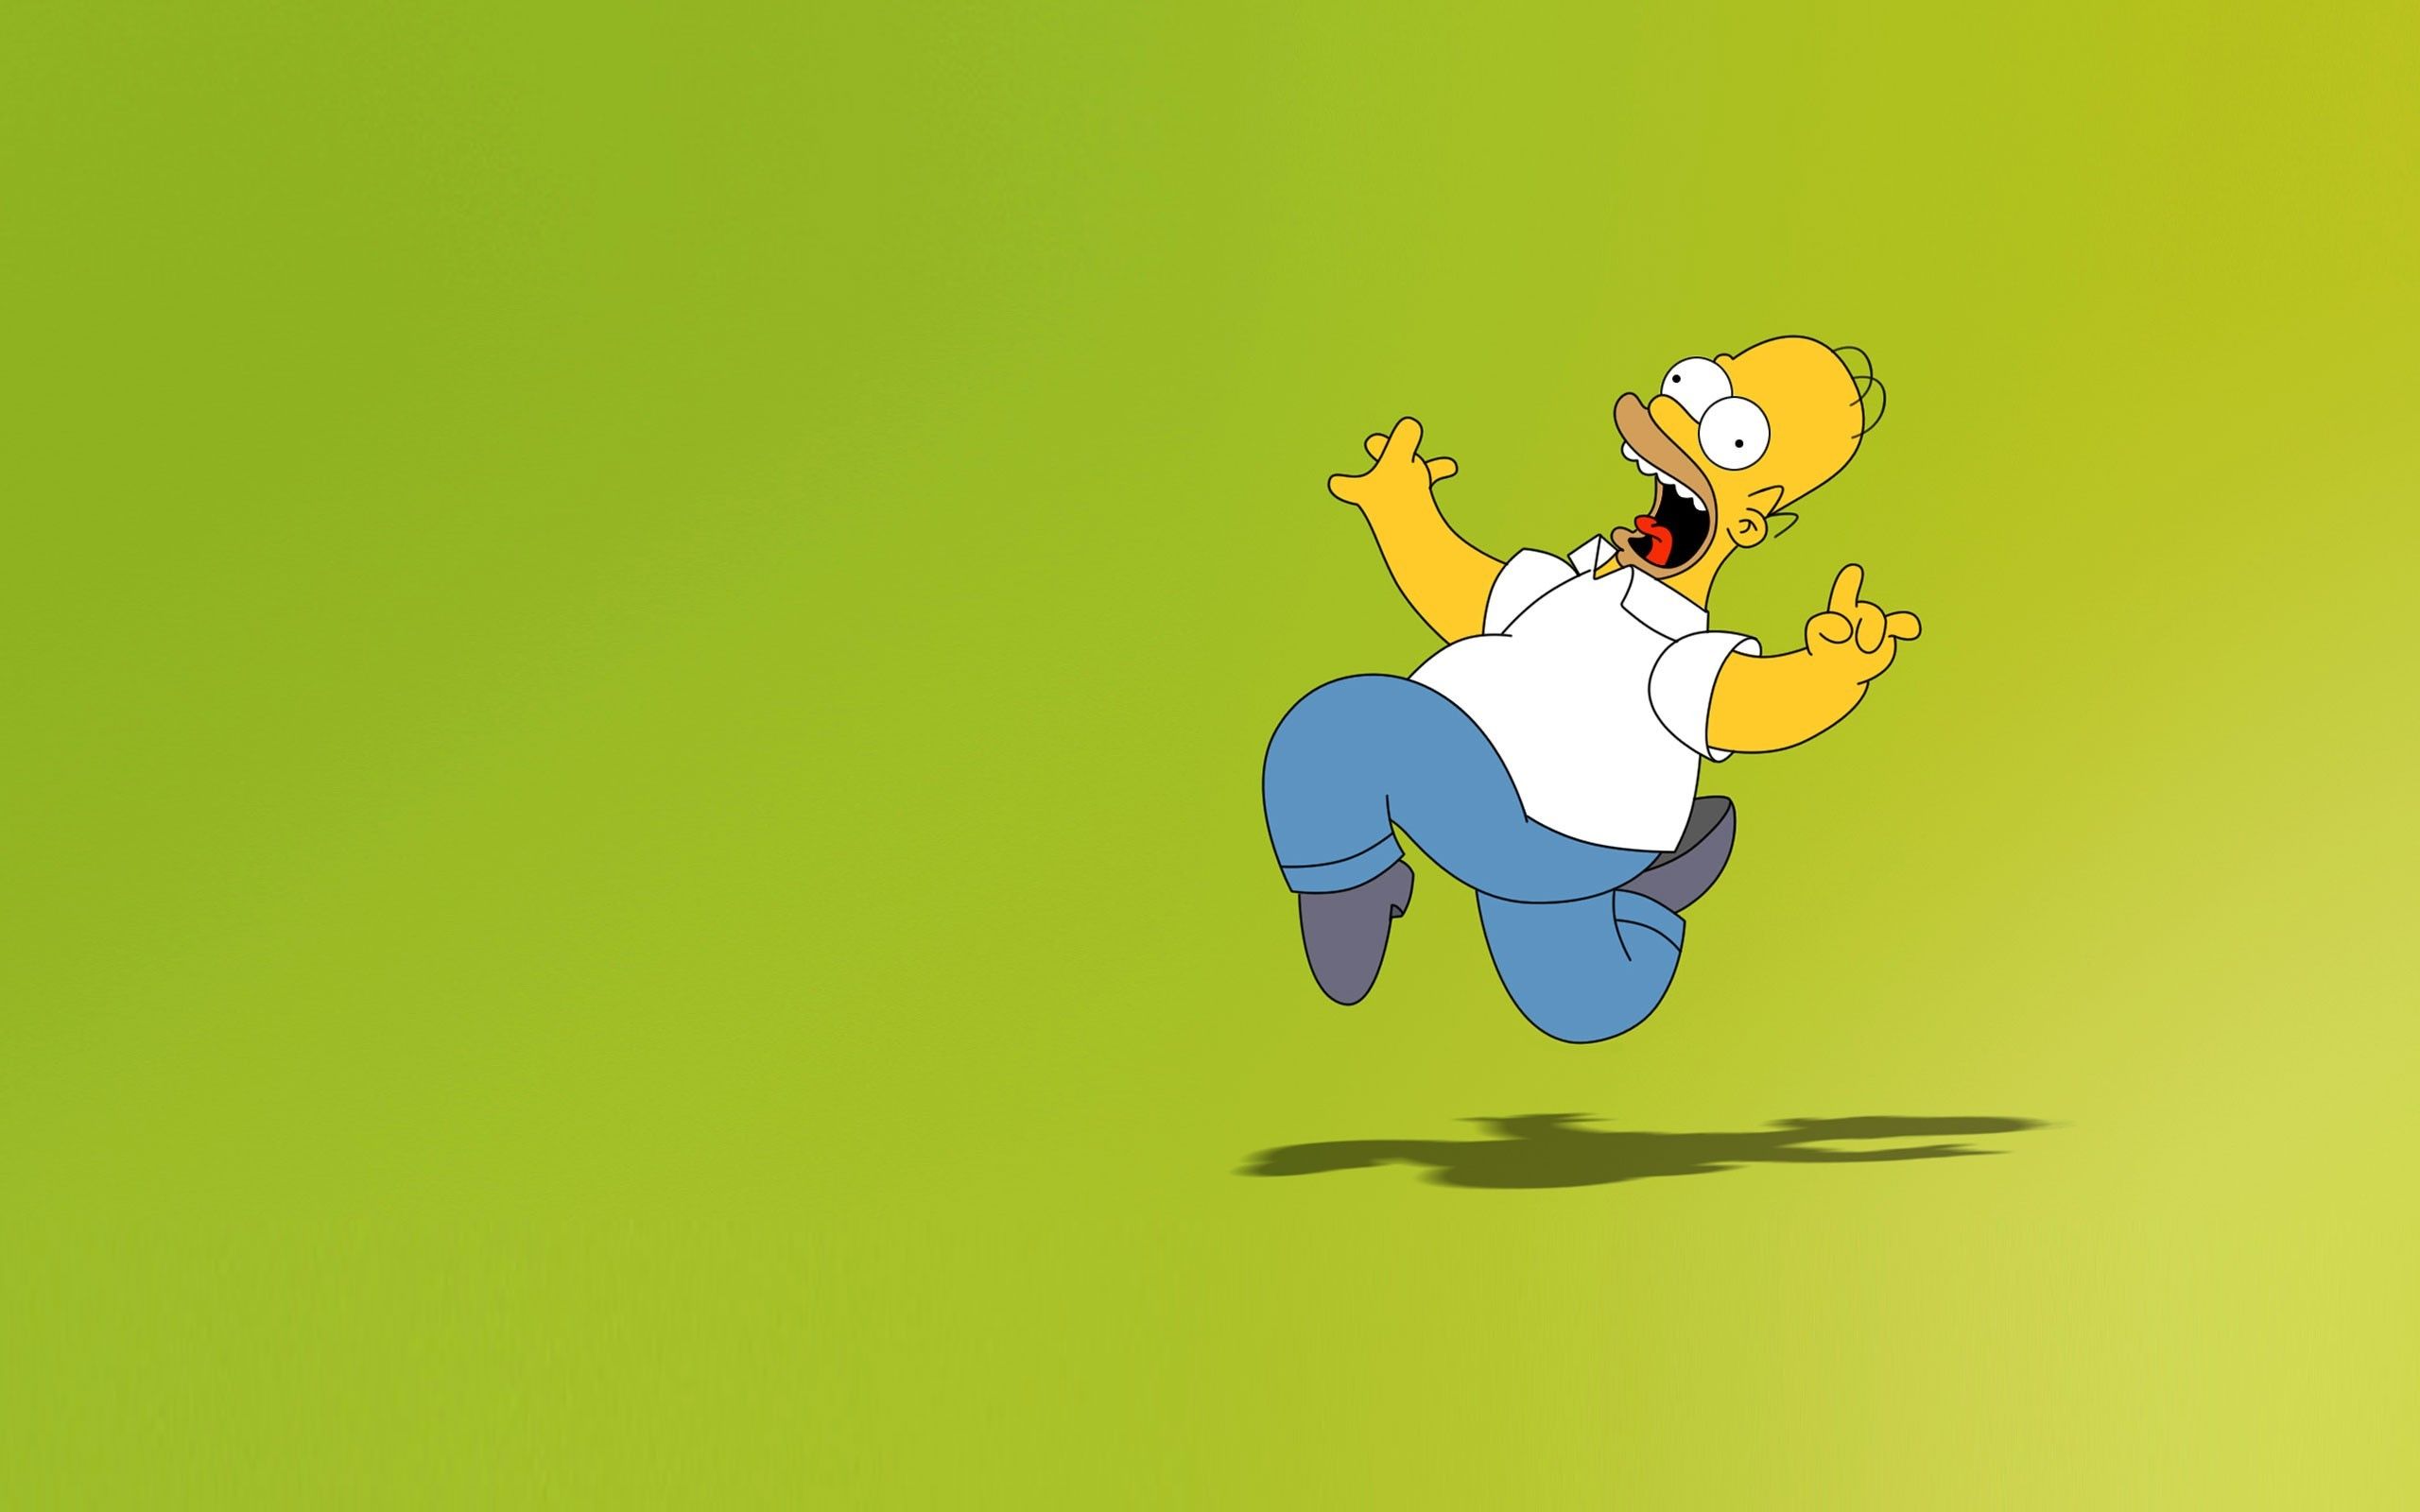 Simpsons Background Wallpapers | WIN10 THEMES